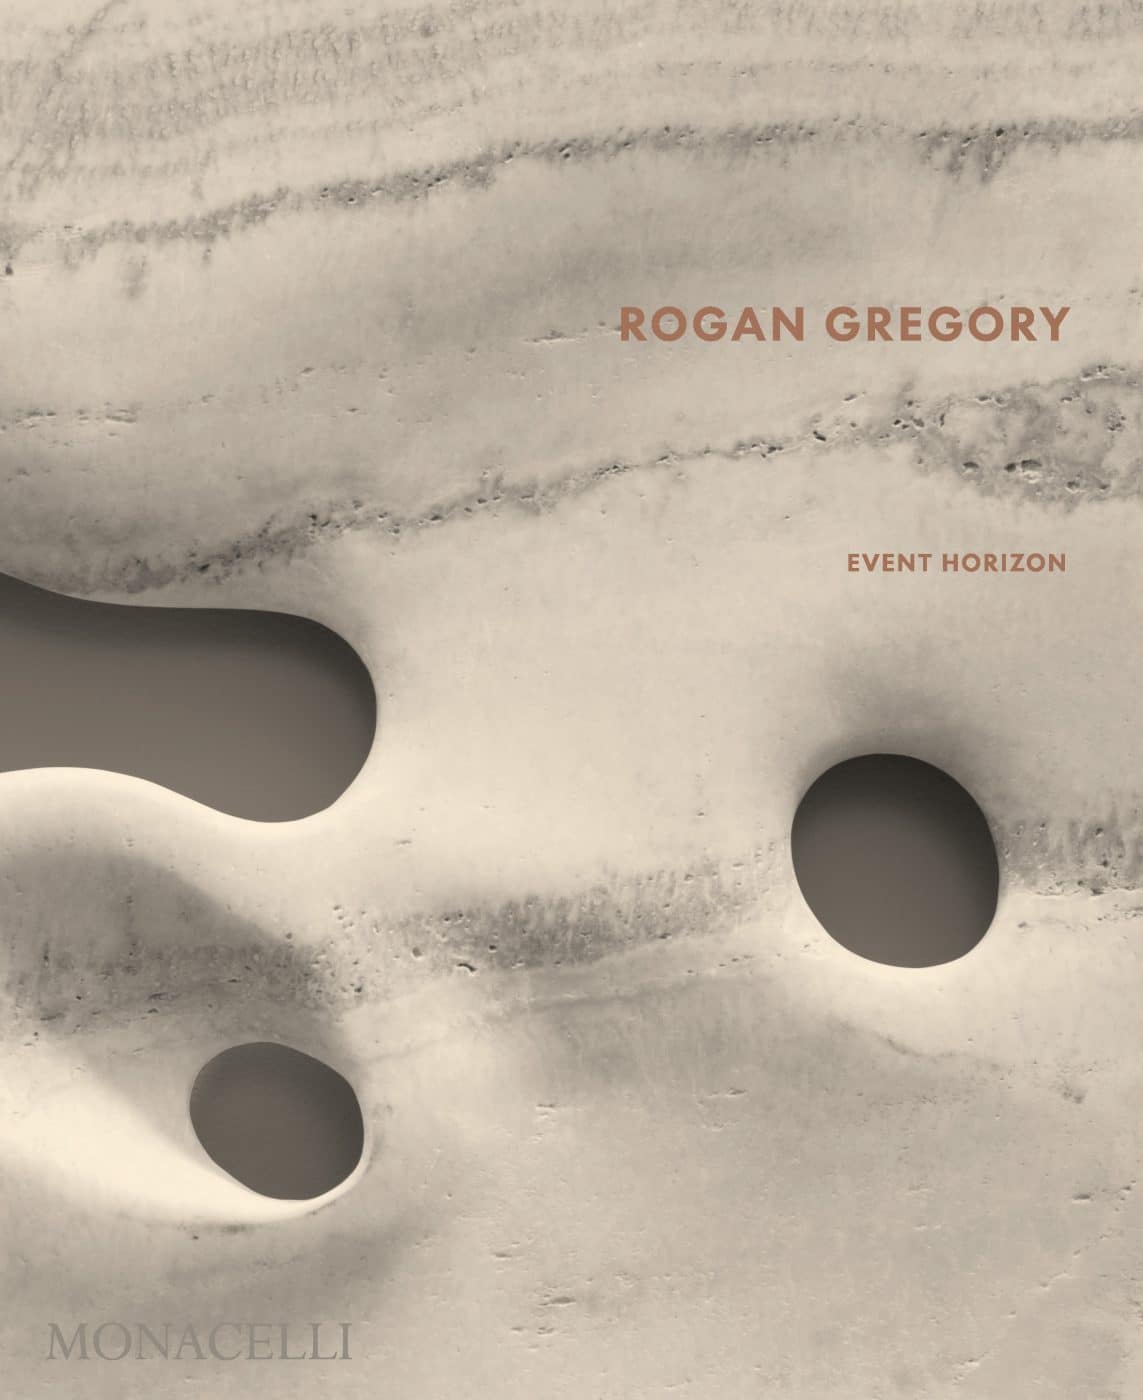 The cover of the book "Rogan Gregory: Event Horizon"